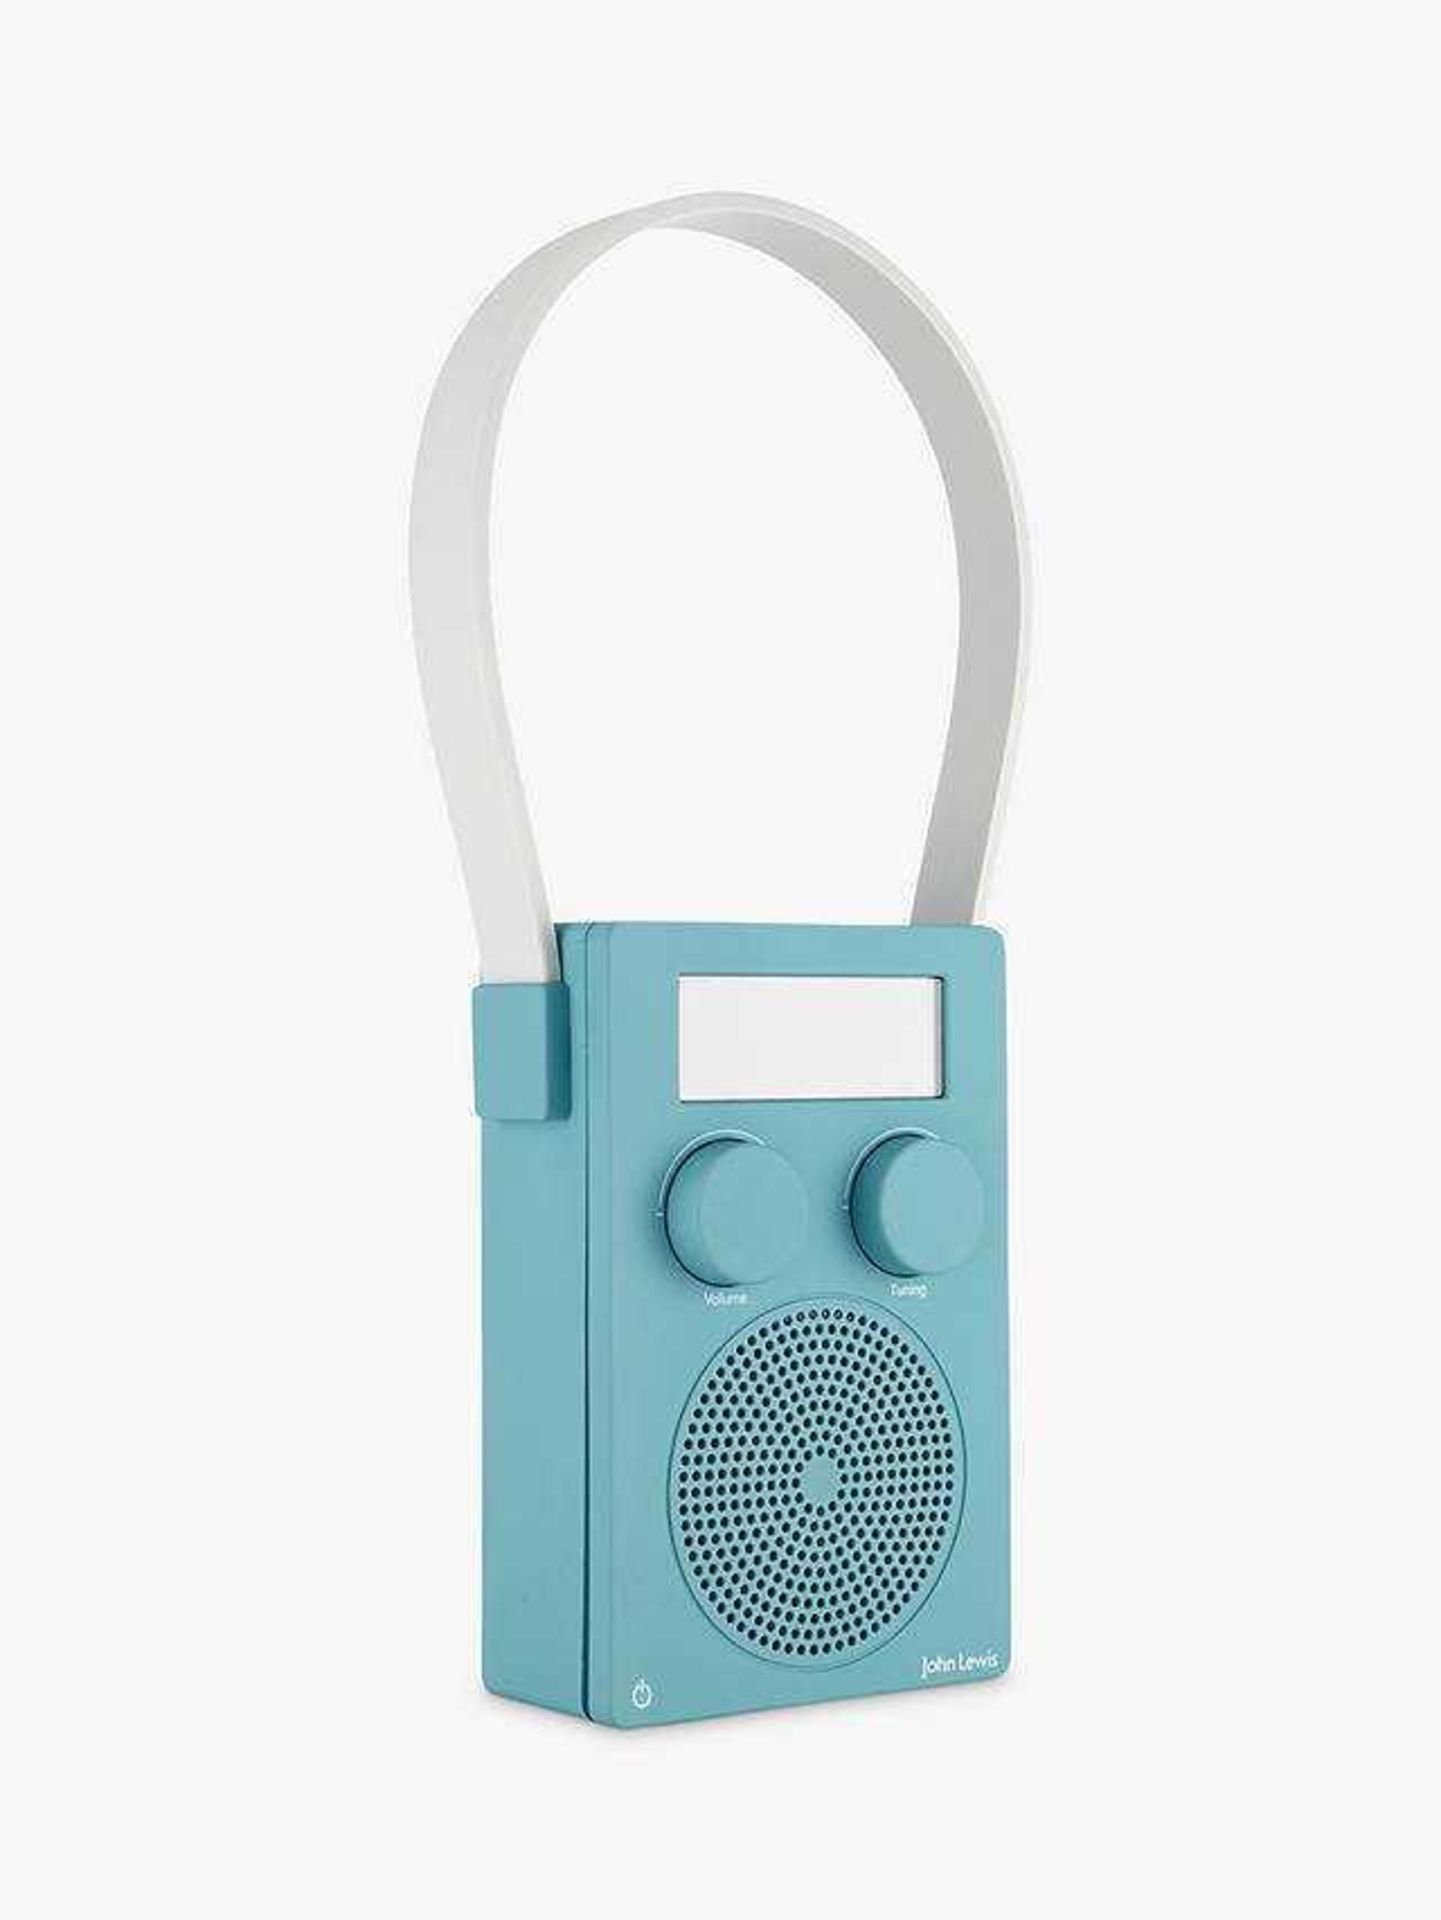 Rrp £50 Each Boxed John Lewis Spectrum Shower Dab And Fm Digital Radios - Image 5 of 6